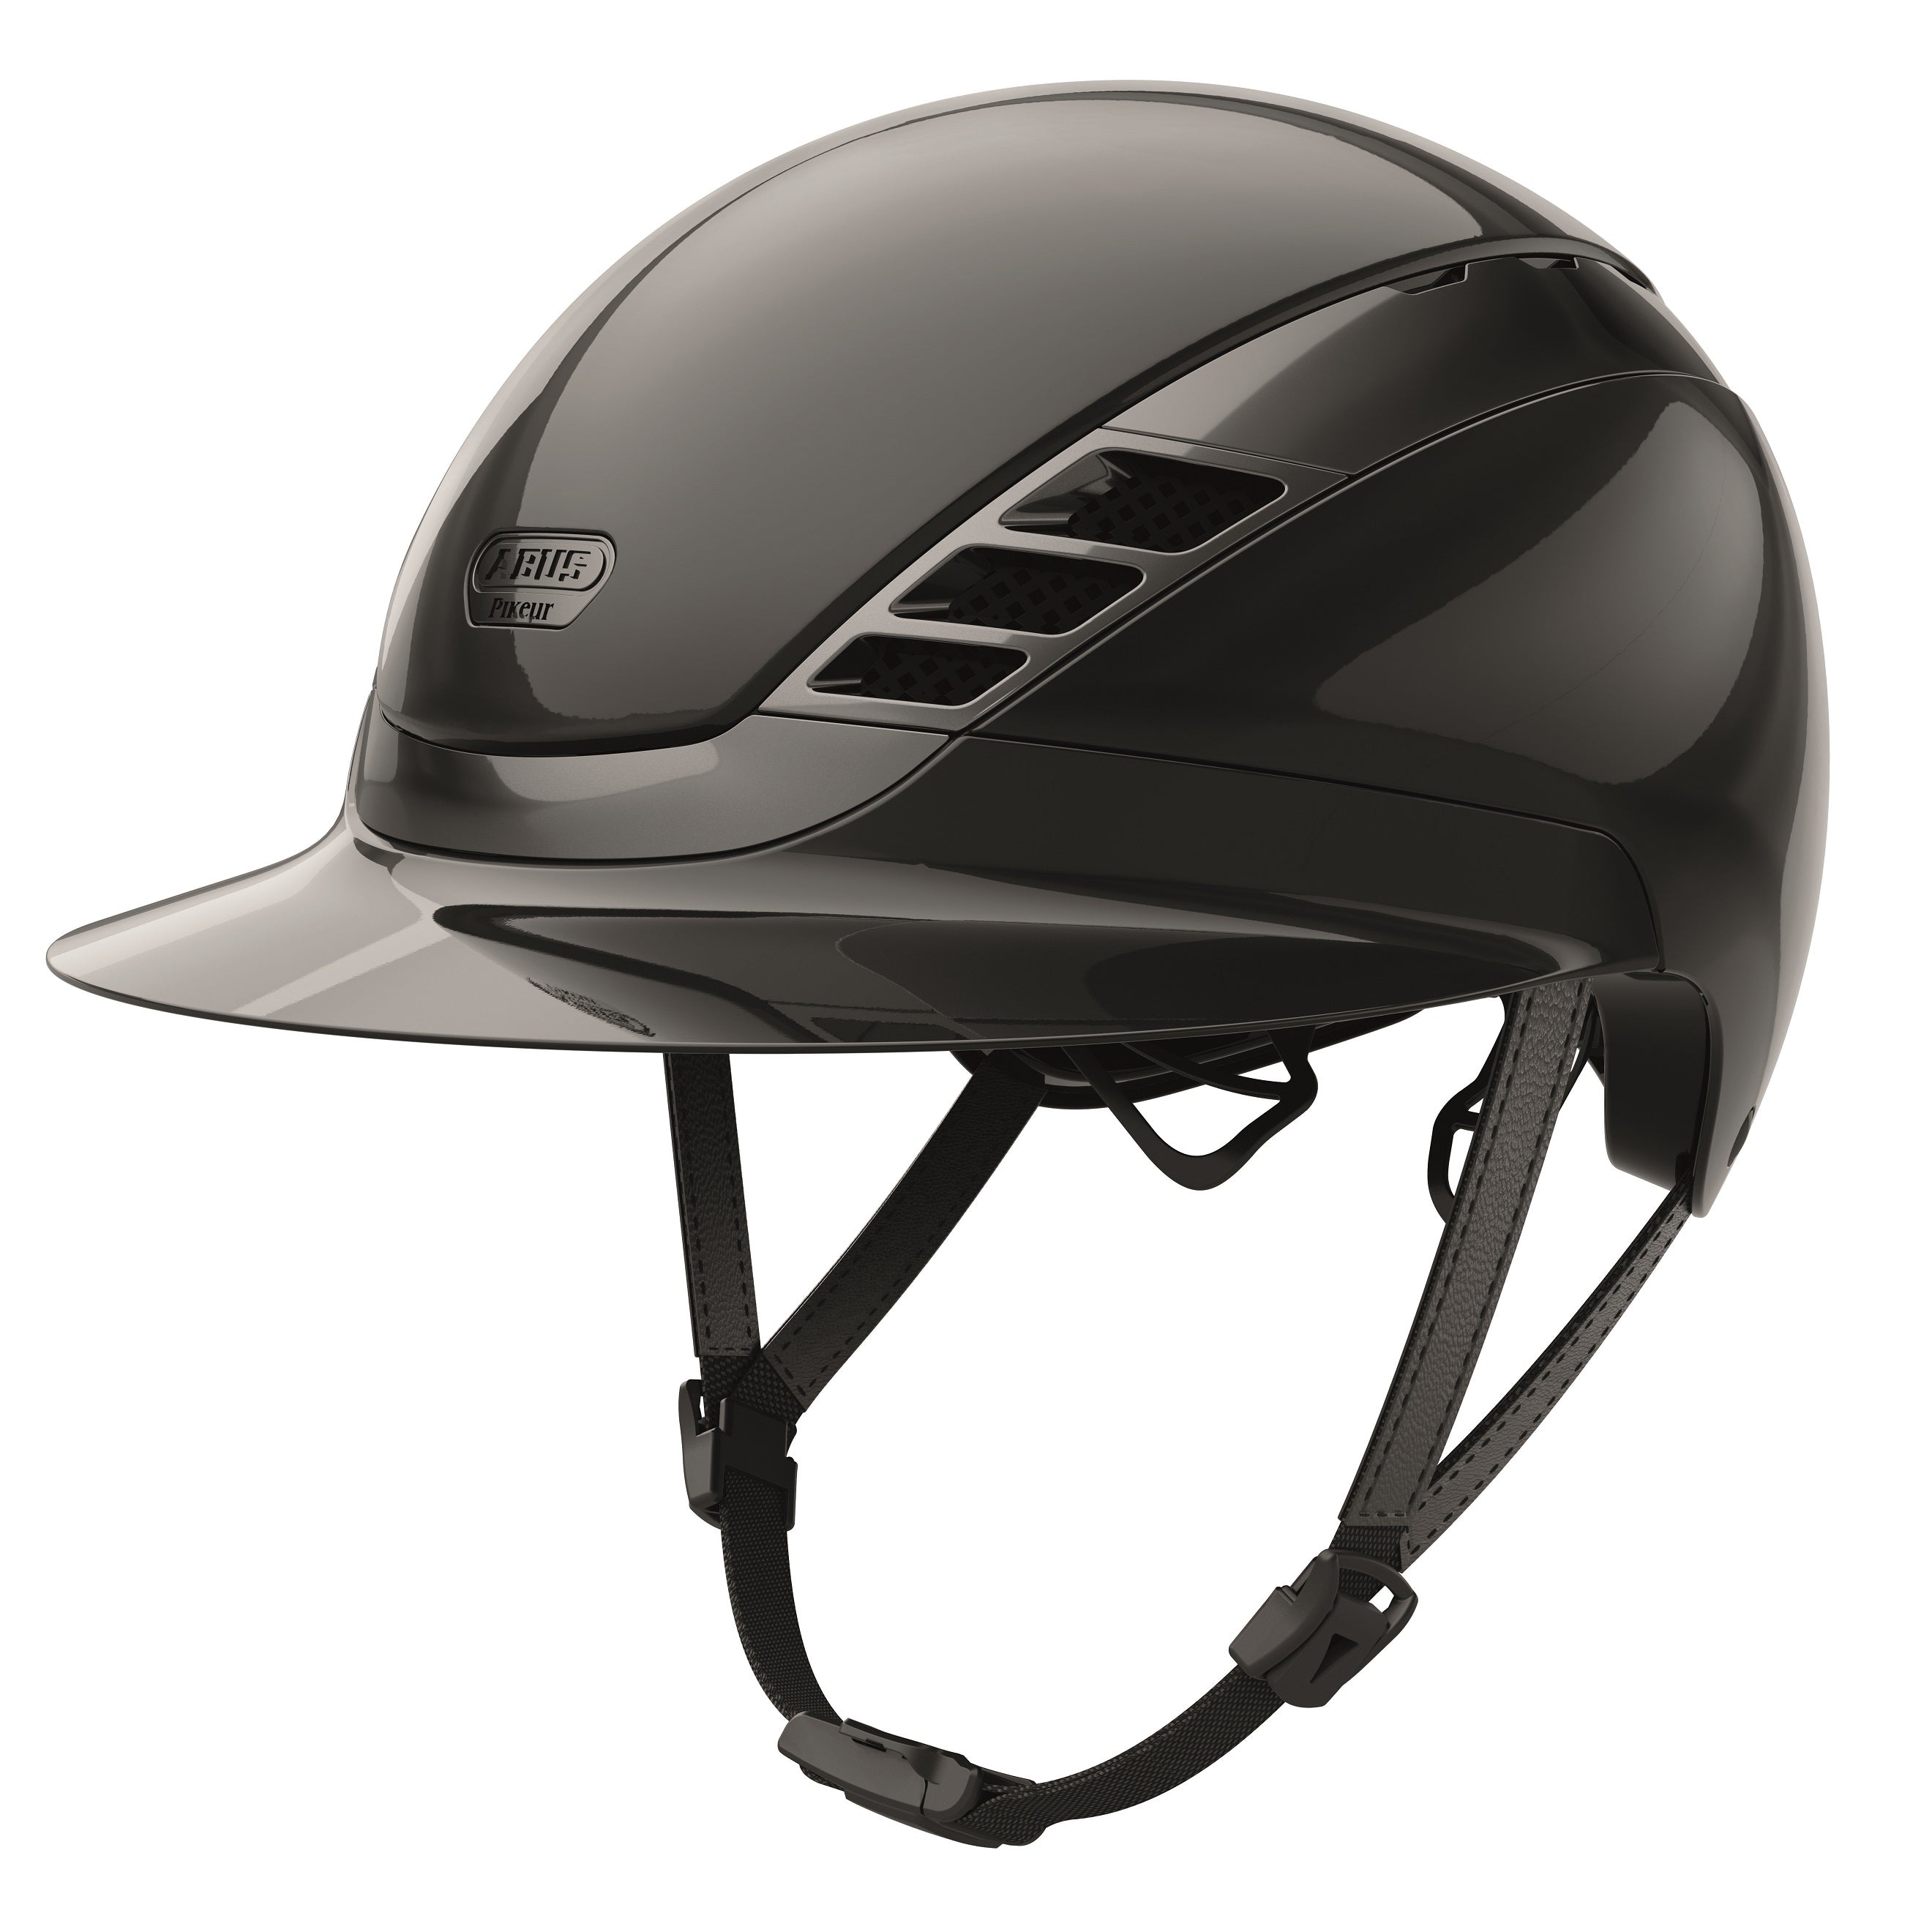 Abus AirLuxe Chrome Riding Helmet LV - due October